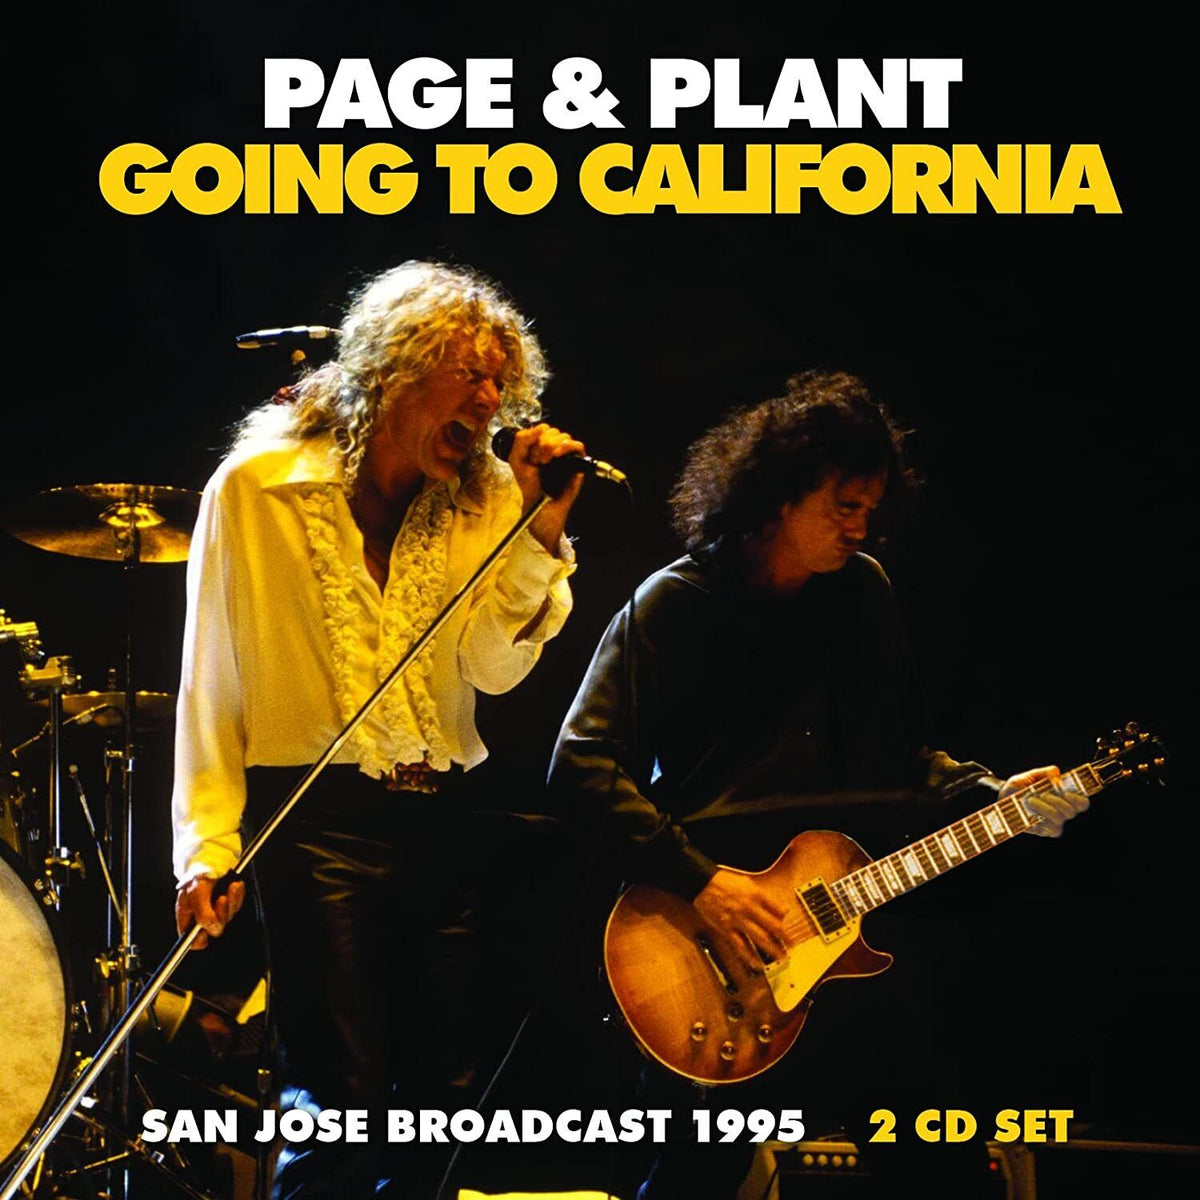 Page & Plant - Going To California - 2 CD Set